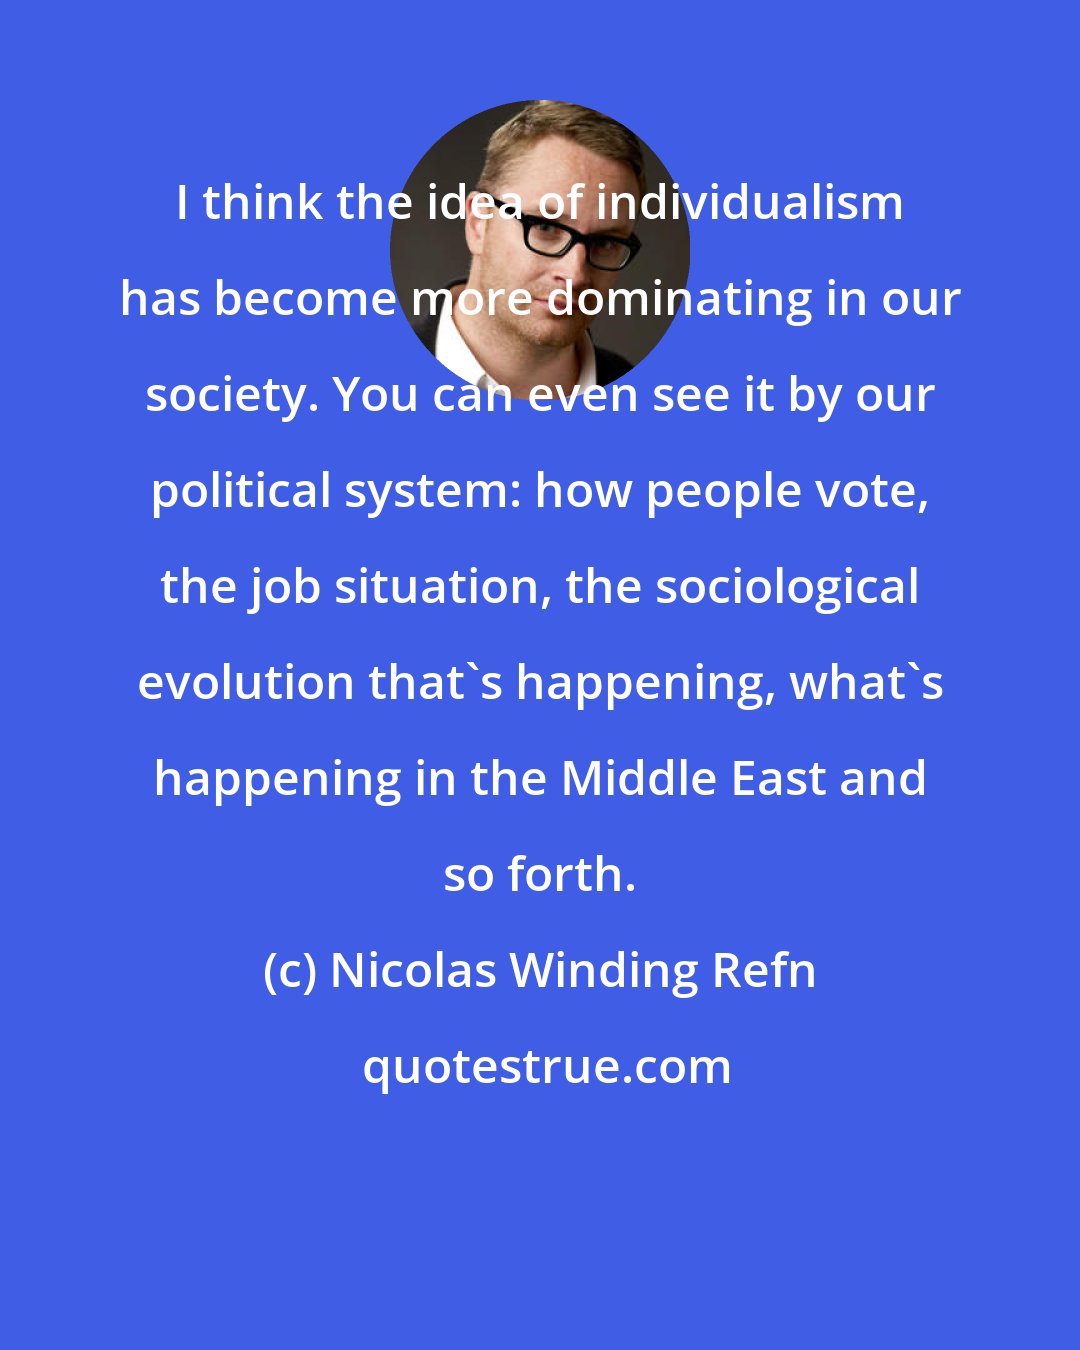 Nicolas Winding Refn: I think the idea of individualism has become more dominating in our society. You can even see it by our political system: how people vote, the job situation, the sociological evolution that's happening, what's happening in the Middle East and so forth.